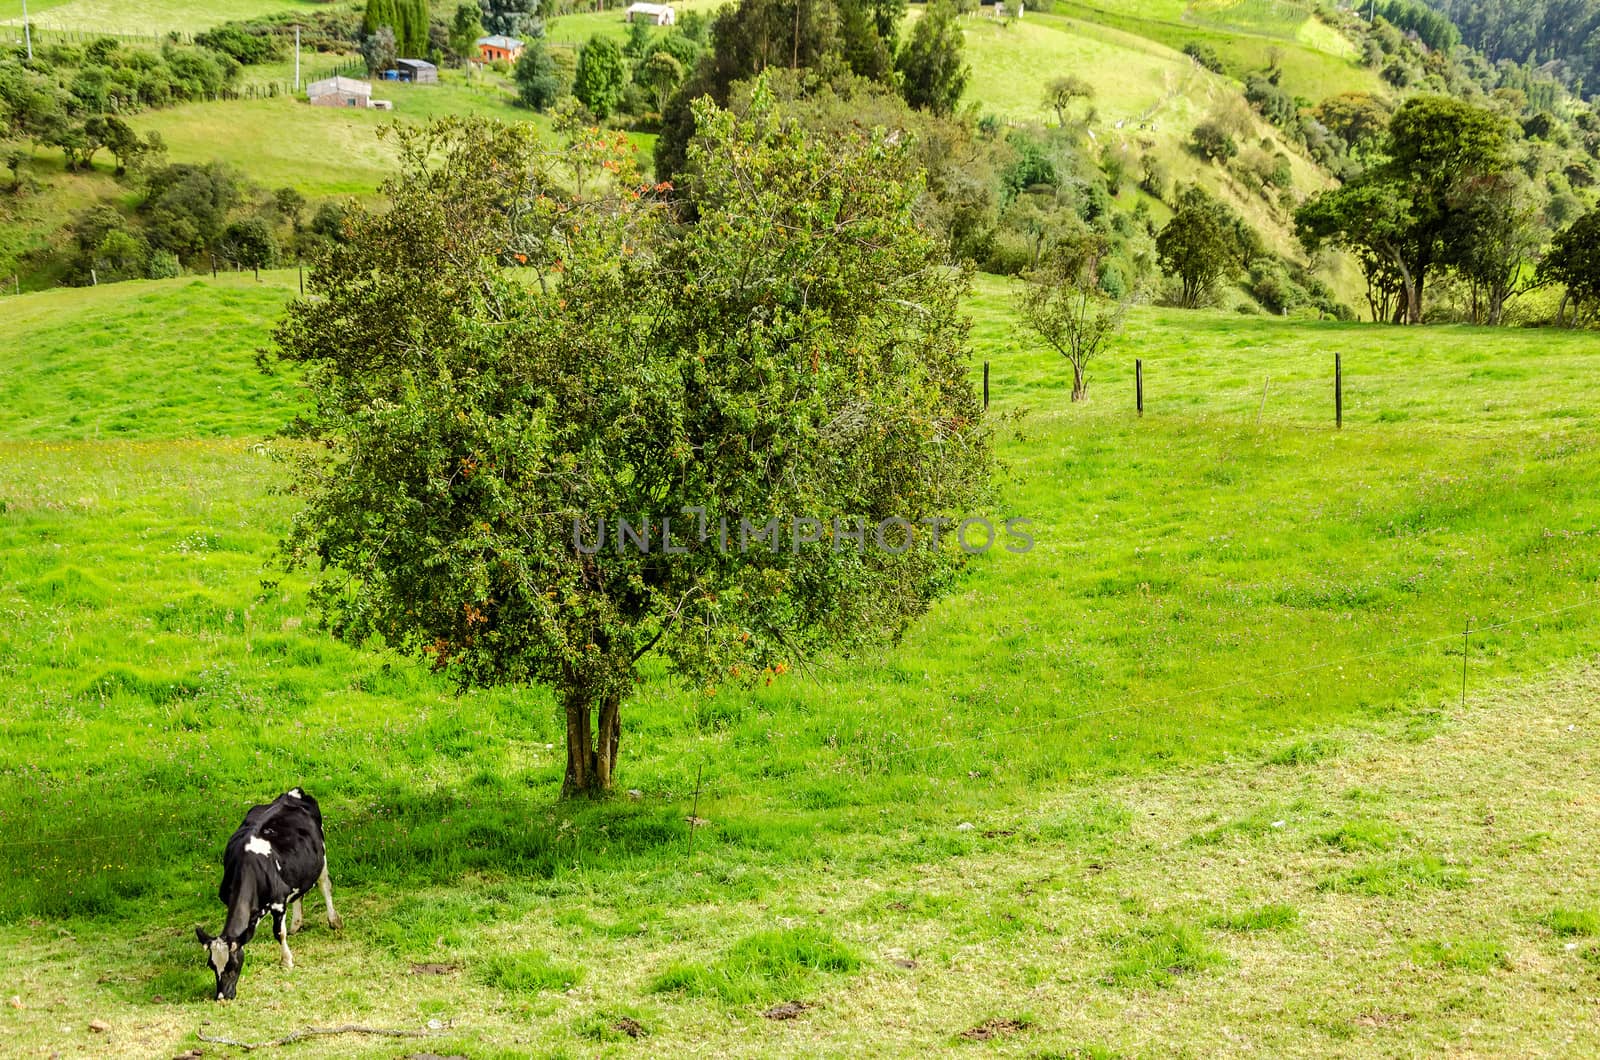 A lone cow and tree in the Colombian countryside in Cundinamarca, Colombia